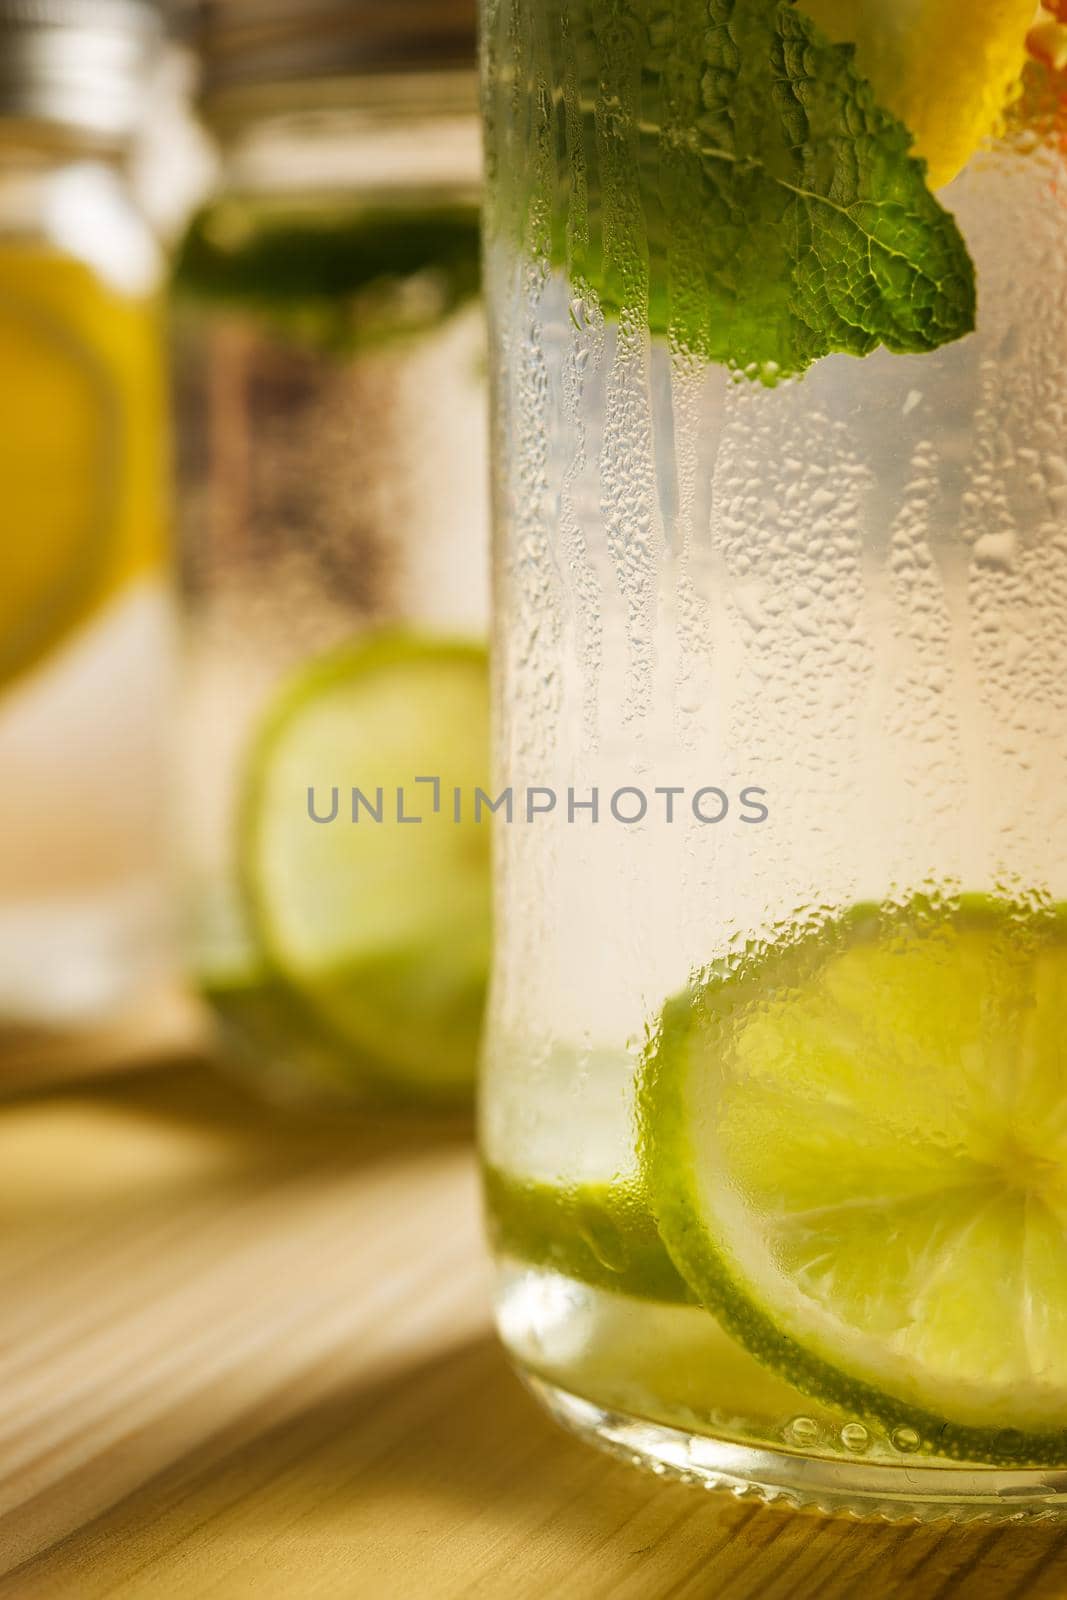 vertical close-up of a glass jar with ice water, lemon, lime and mint leaves on a wooden table and illuminated by sunlight, in the background and out of focus are other lemonades